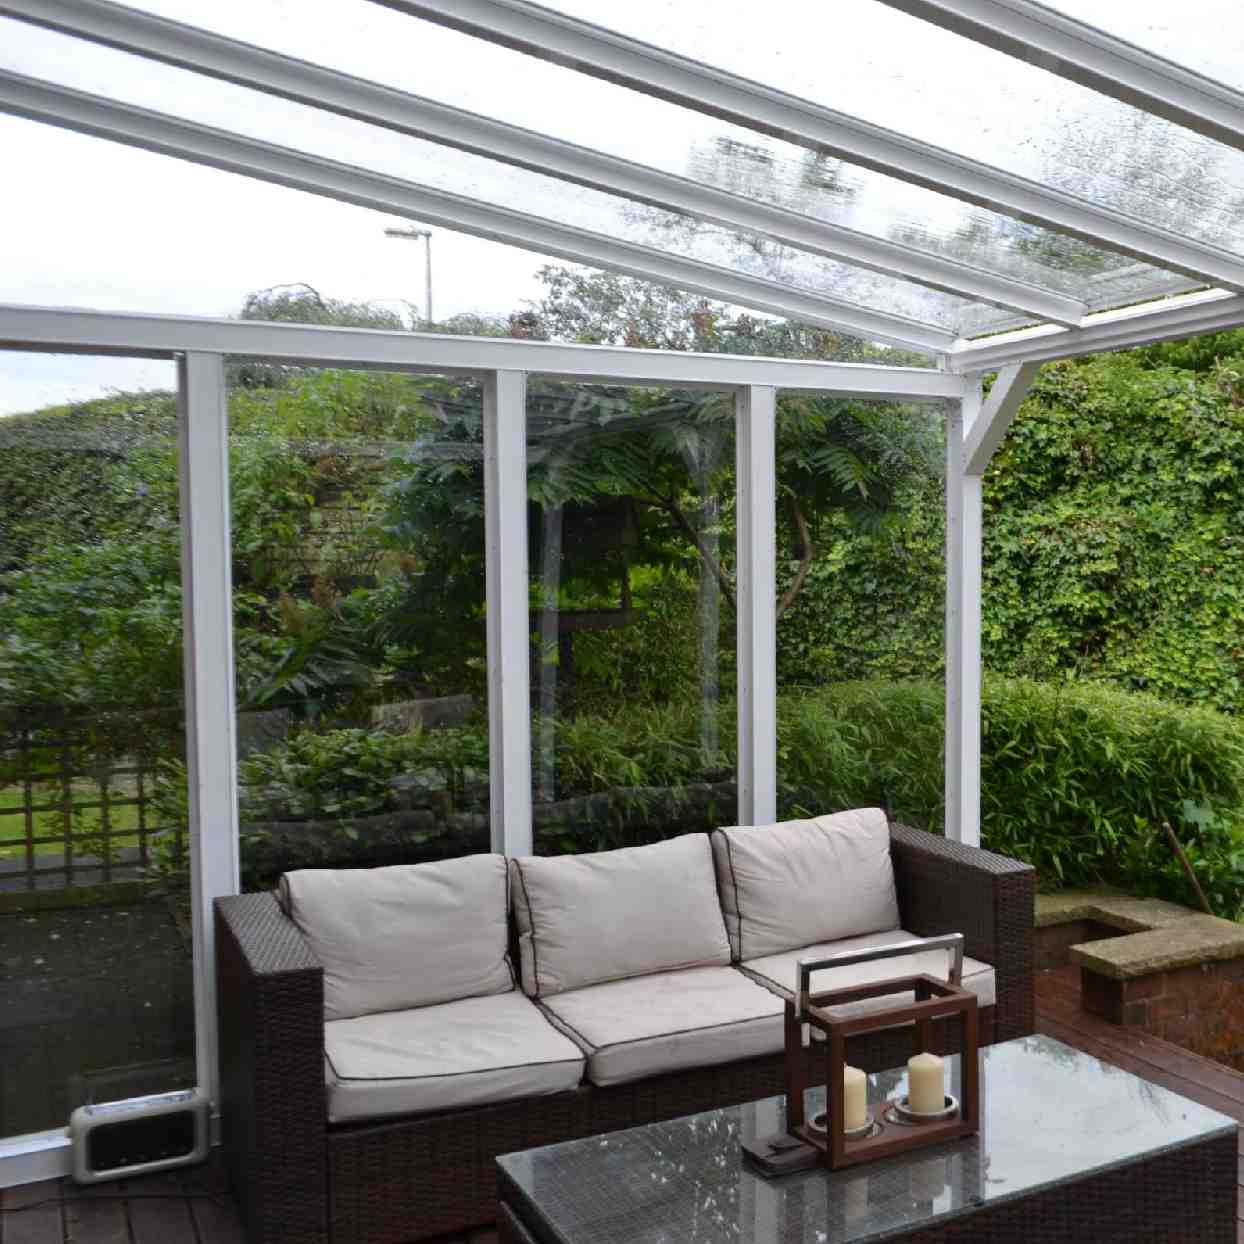 Buy Omega Verandah White with 16mm Polycarbonate Glazing - 10.6m (W) x 1.5m (P), (5) Supporting Posts online today